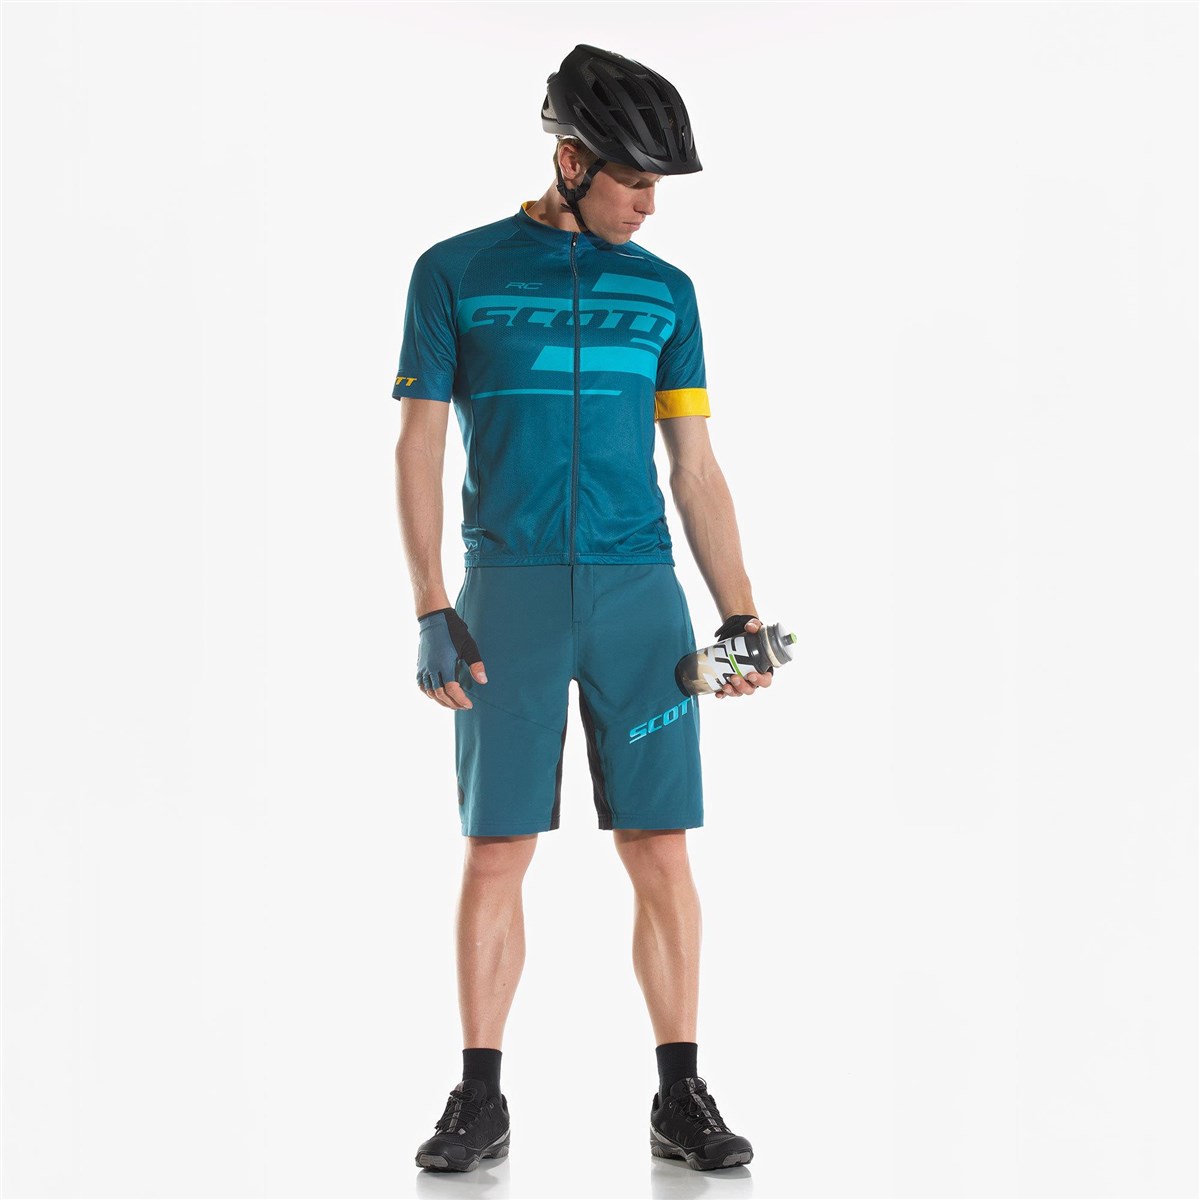 Scott Endurance Loose Fit With Pad Baggy Cycling Shorts